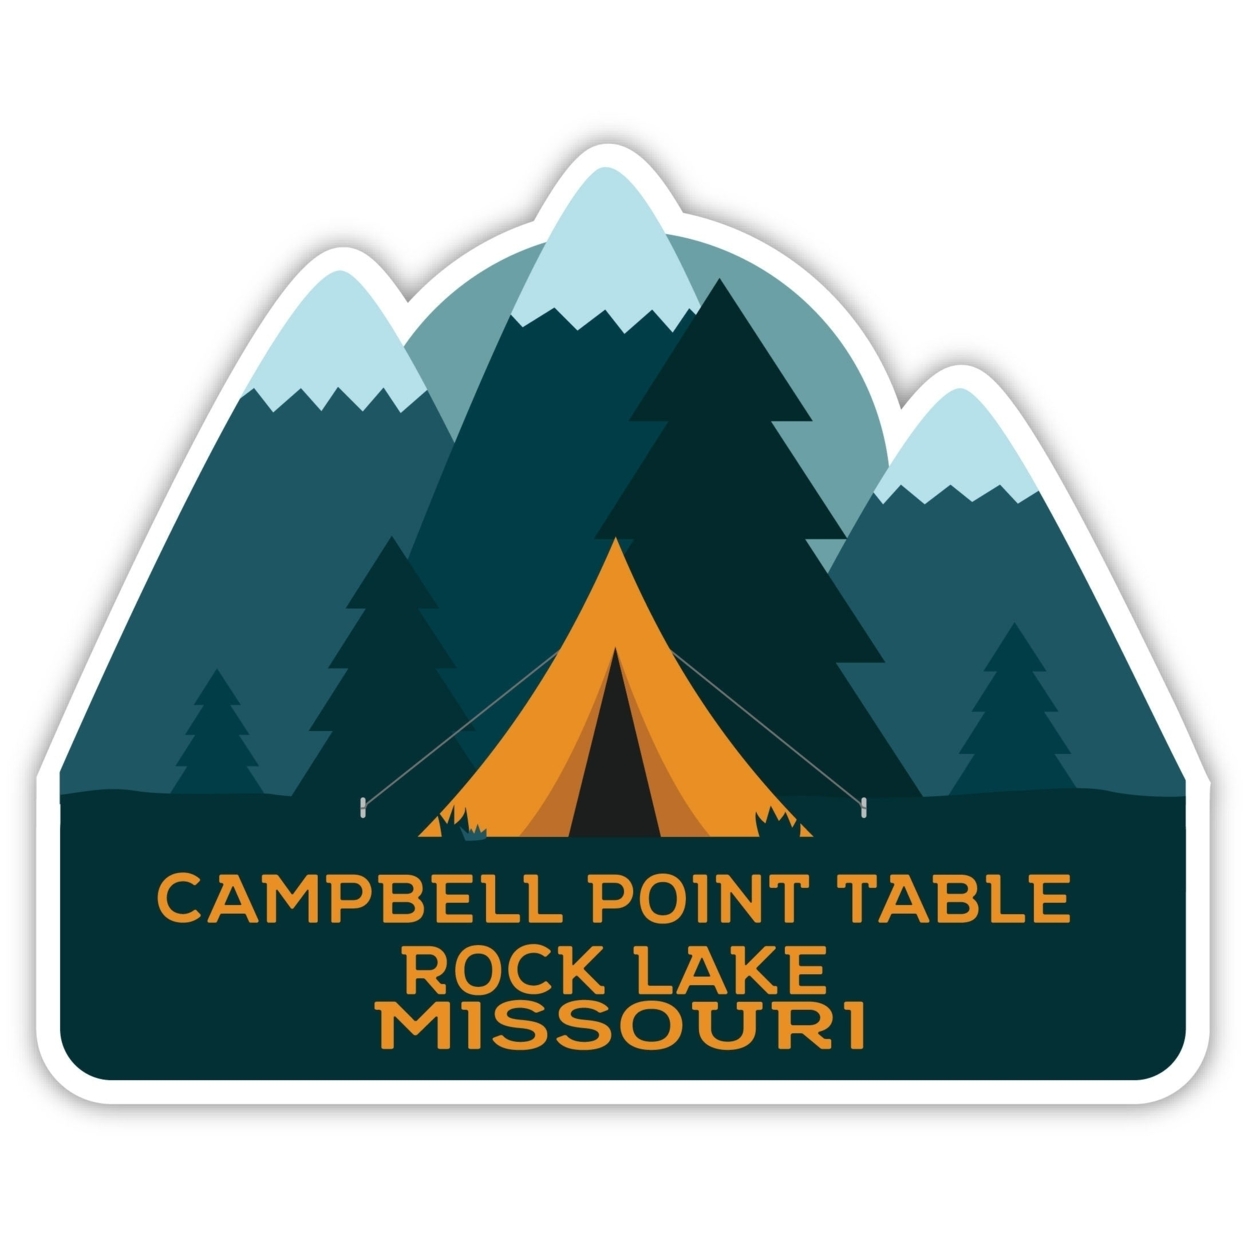 Campbell Point Table Rock Lake Missouri Souvenir Decorative Stickers (Choose Theme And Size) - 4-Pack, 10-Inch, Tent